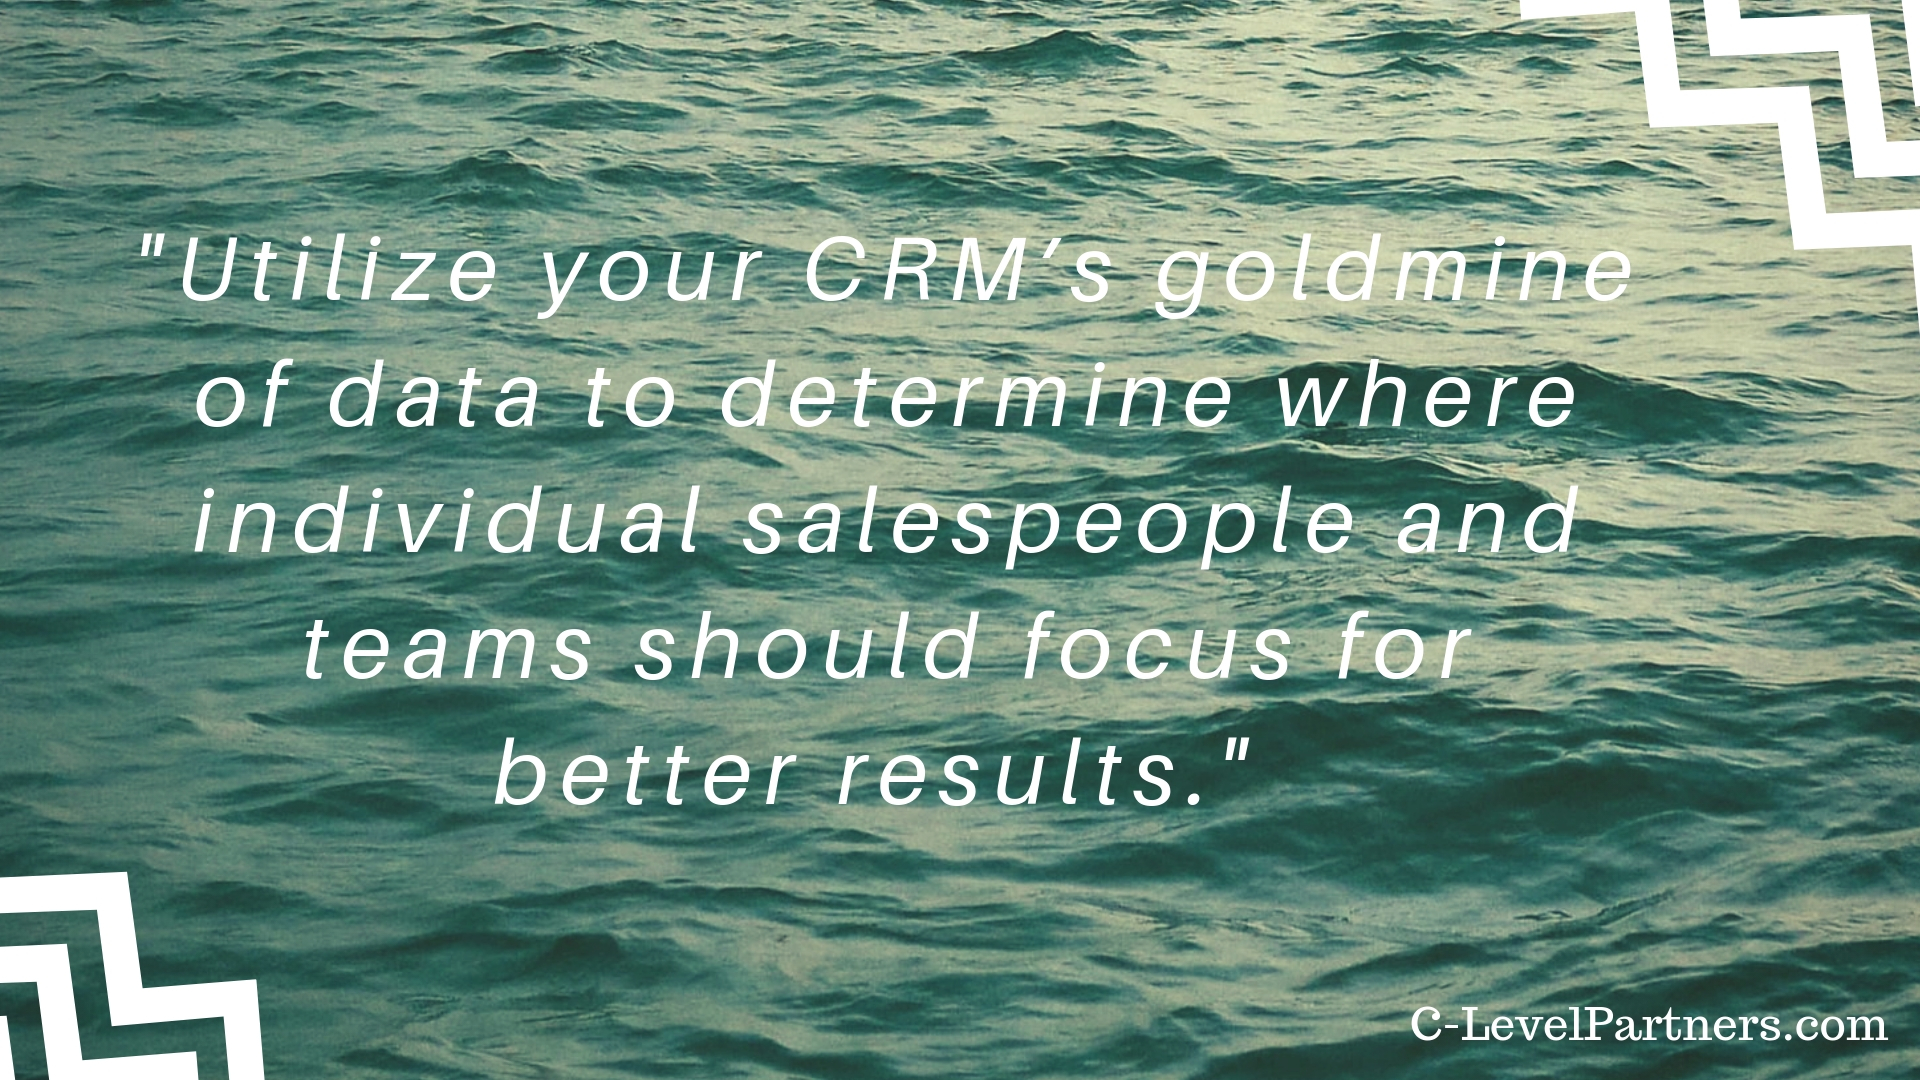 C-Level Partners recommends utilizing your CRM’s goldmine of data to determine where individual salespeople and teams should focus for better results.